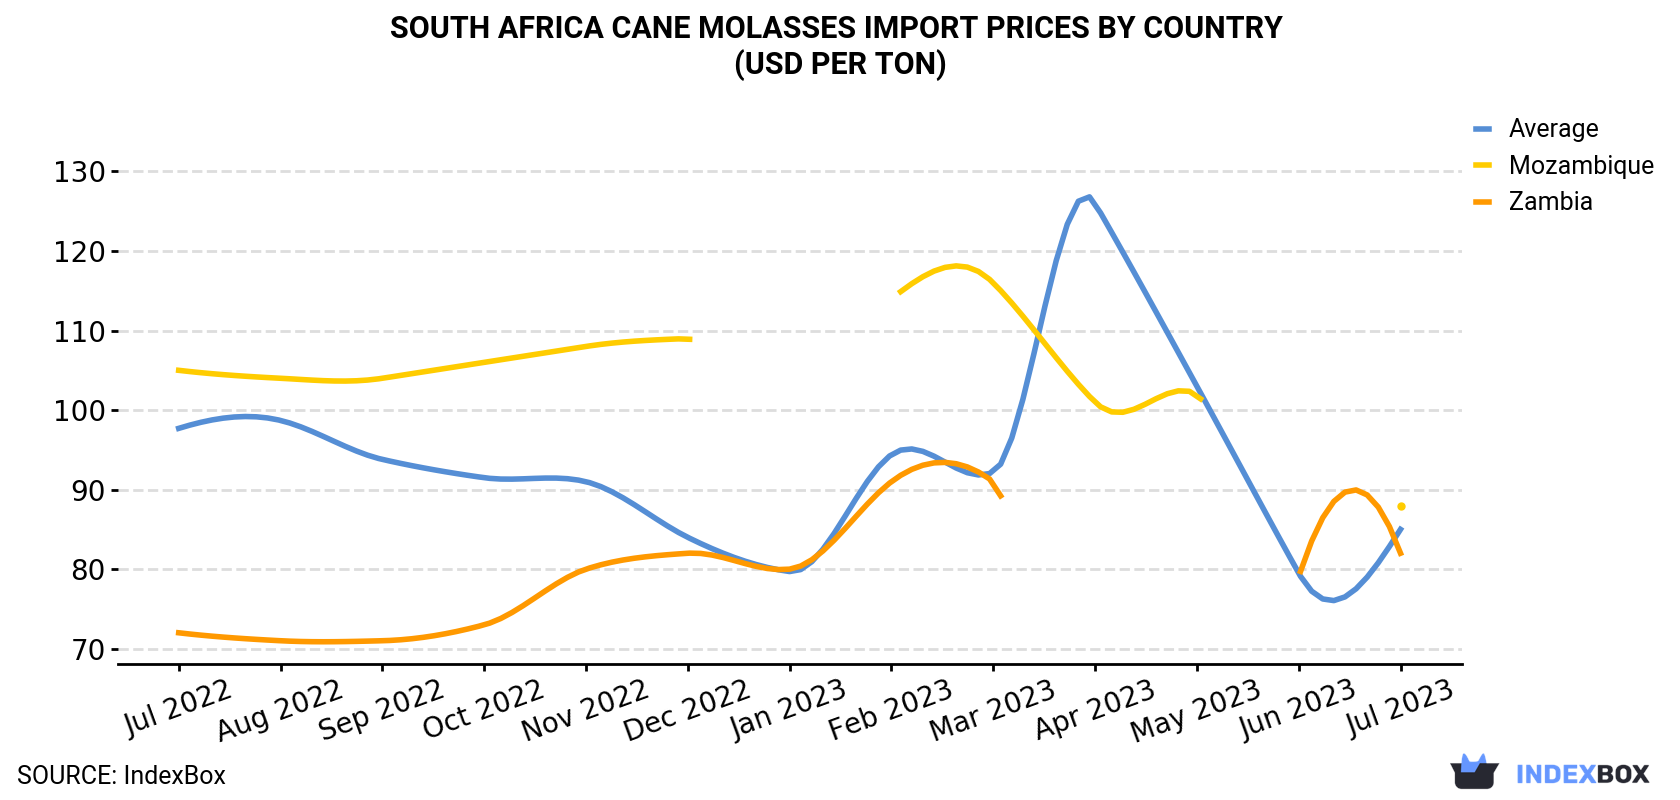 South Africa Cane Molasses Import Prices By Country (USD Per Ton)